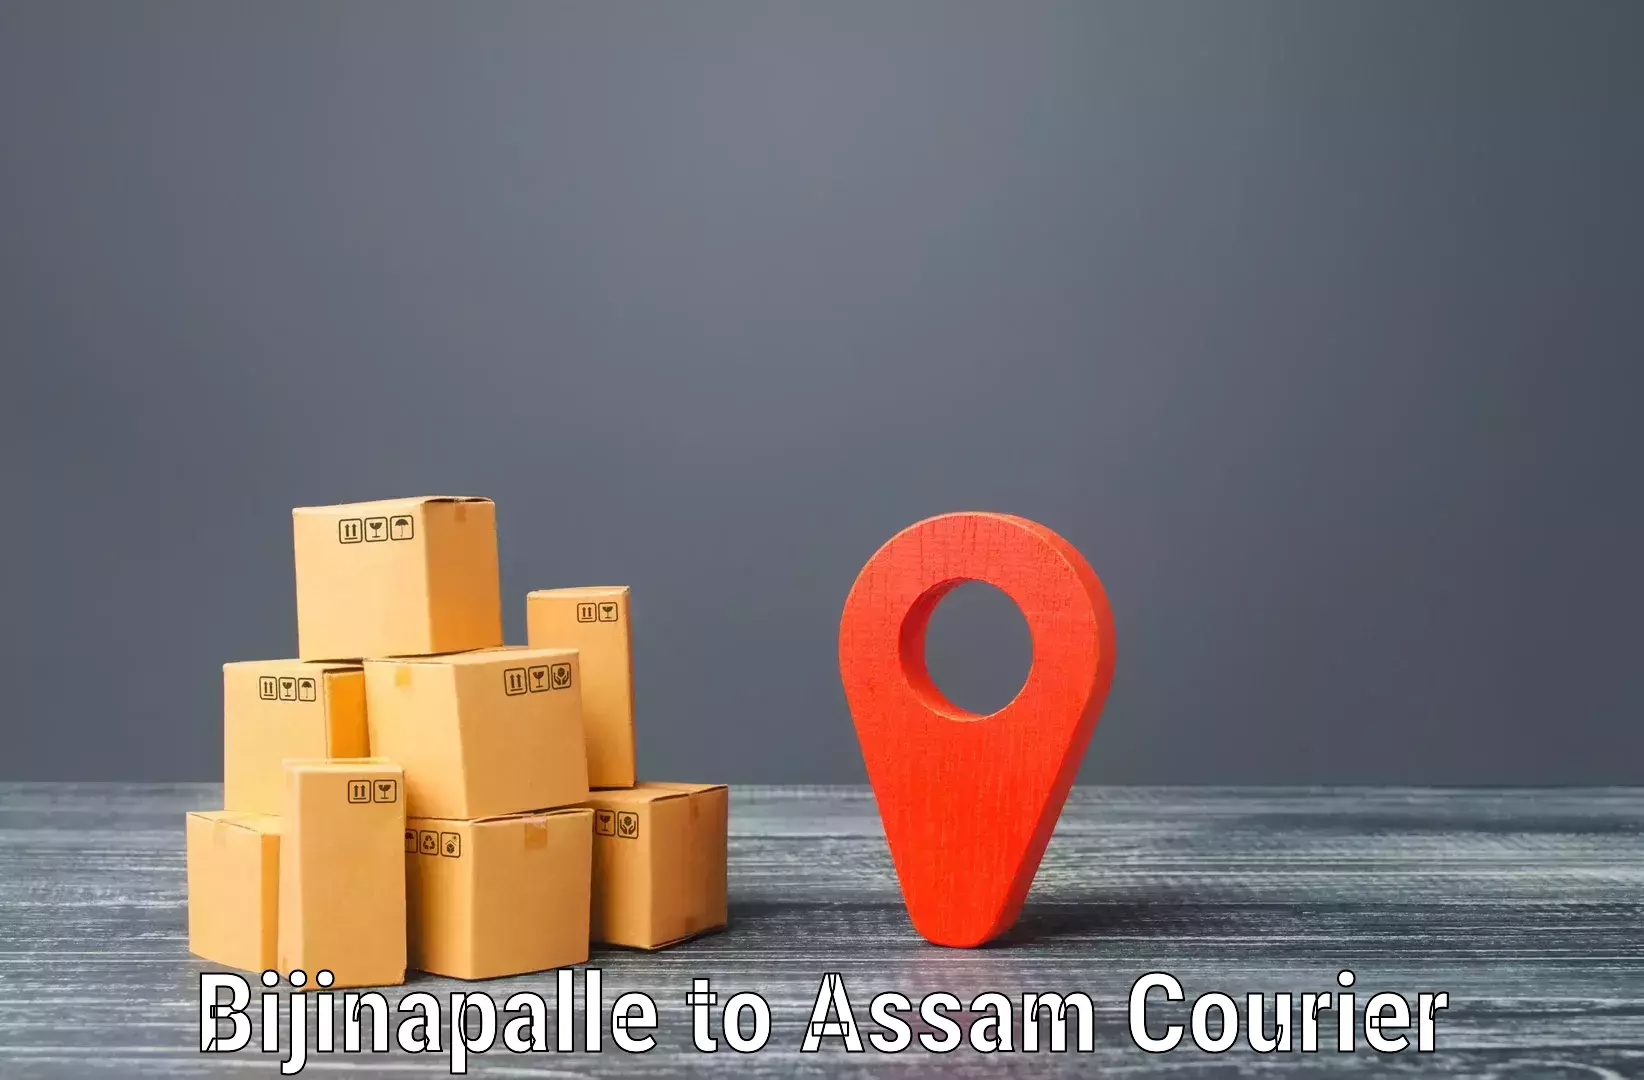 Reliable courier service Bijinapalle to Rupai Siding